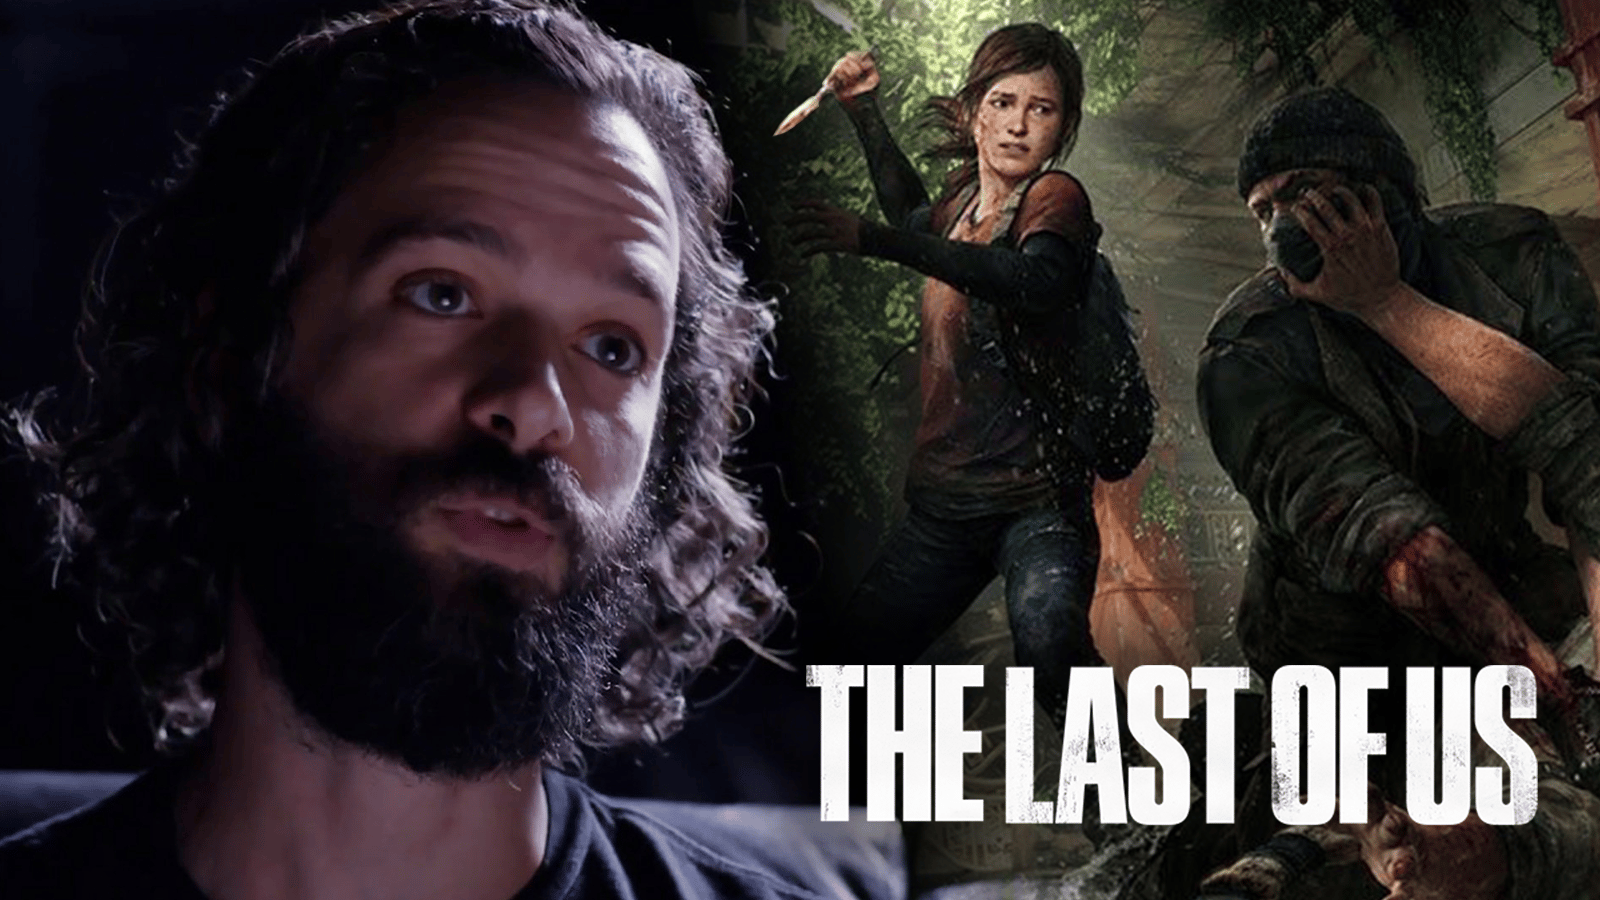 The Last of Us Fans Beware: Season 2 Will Leave Out Key Storylines